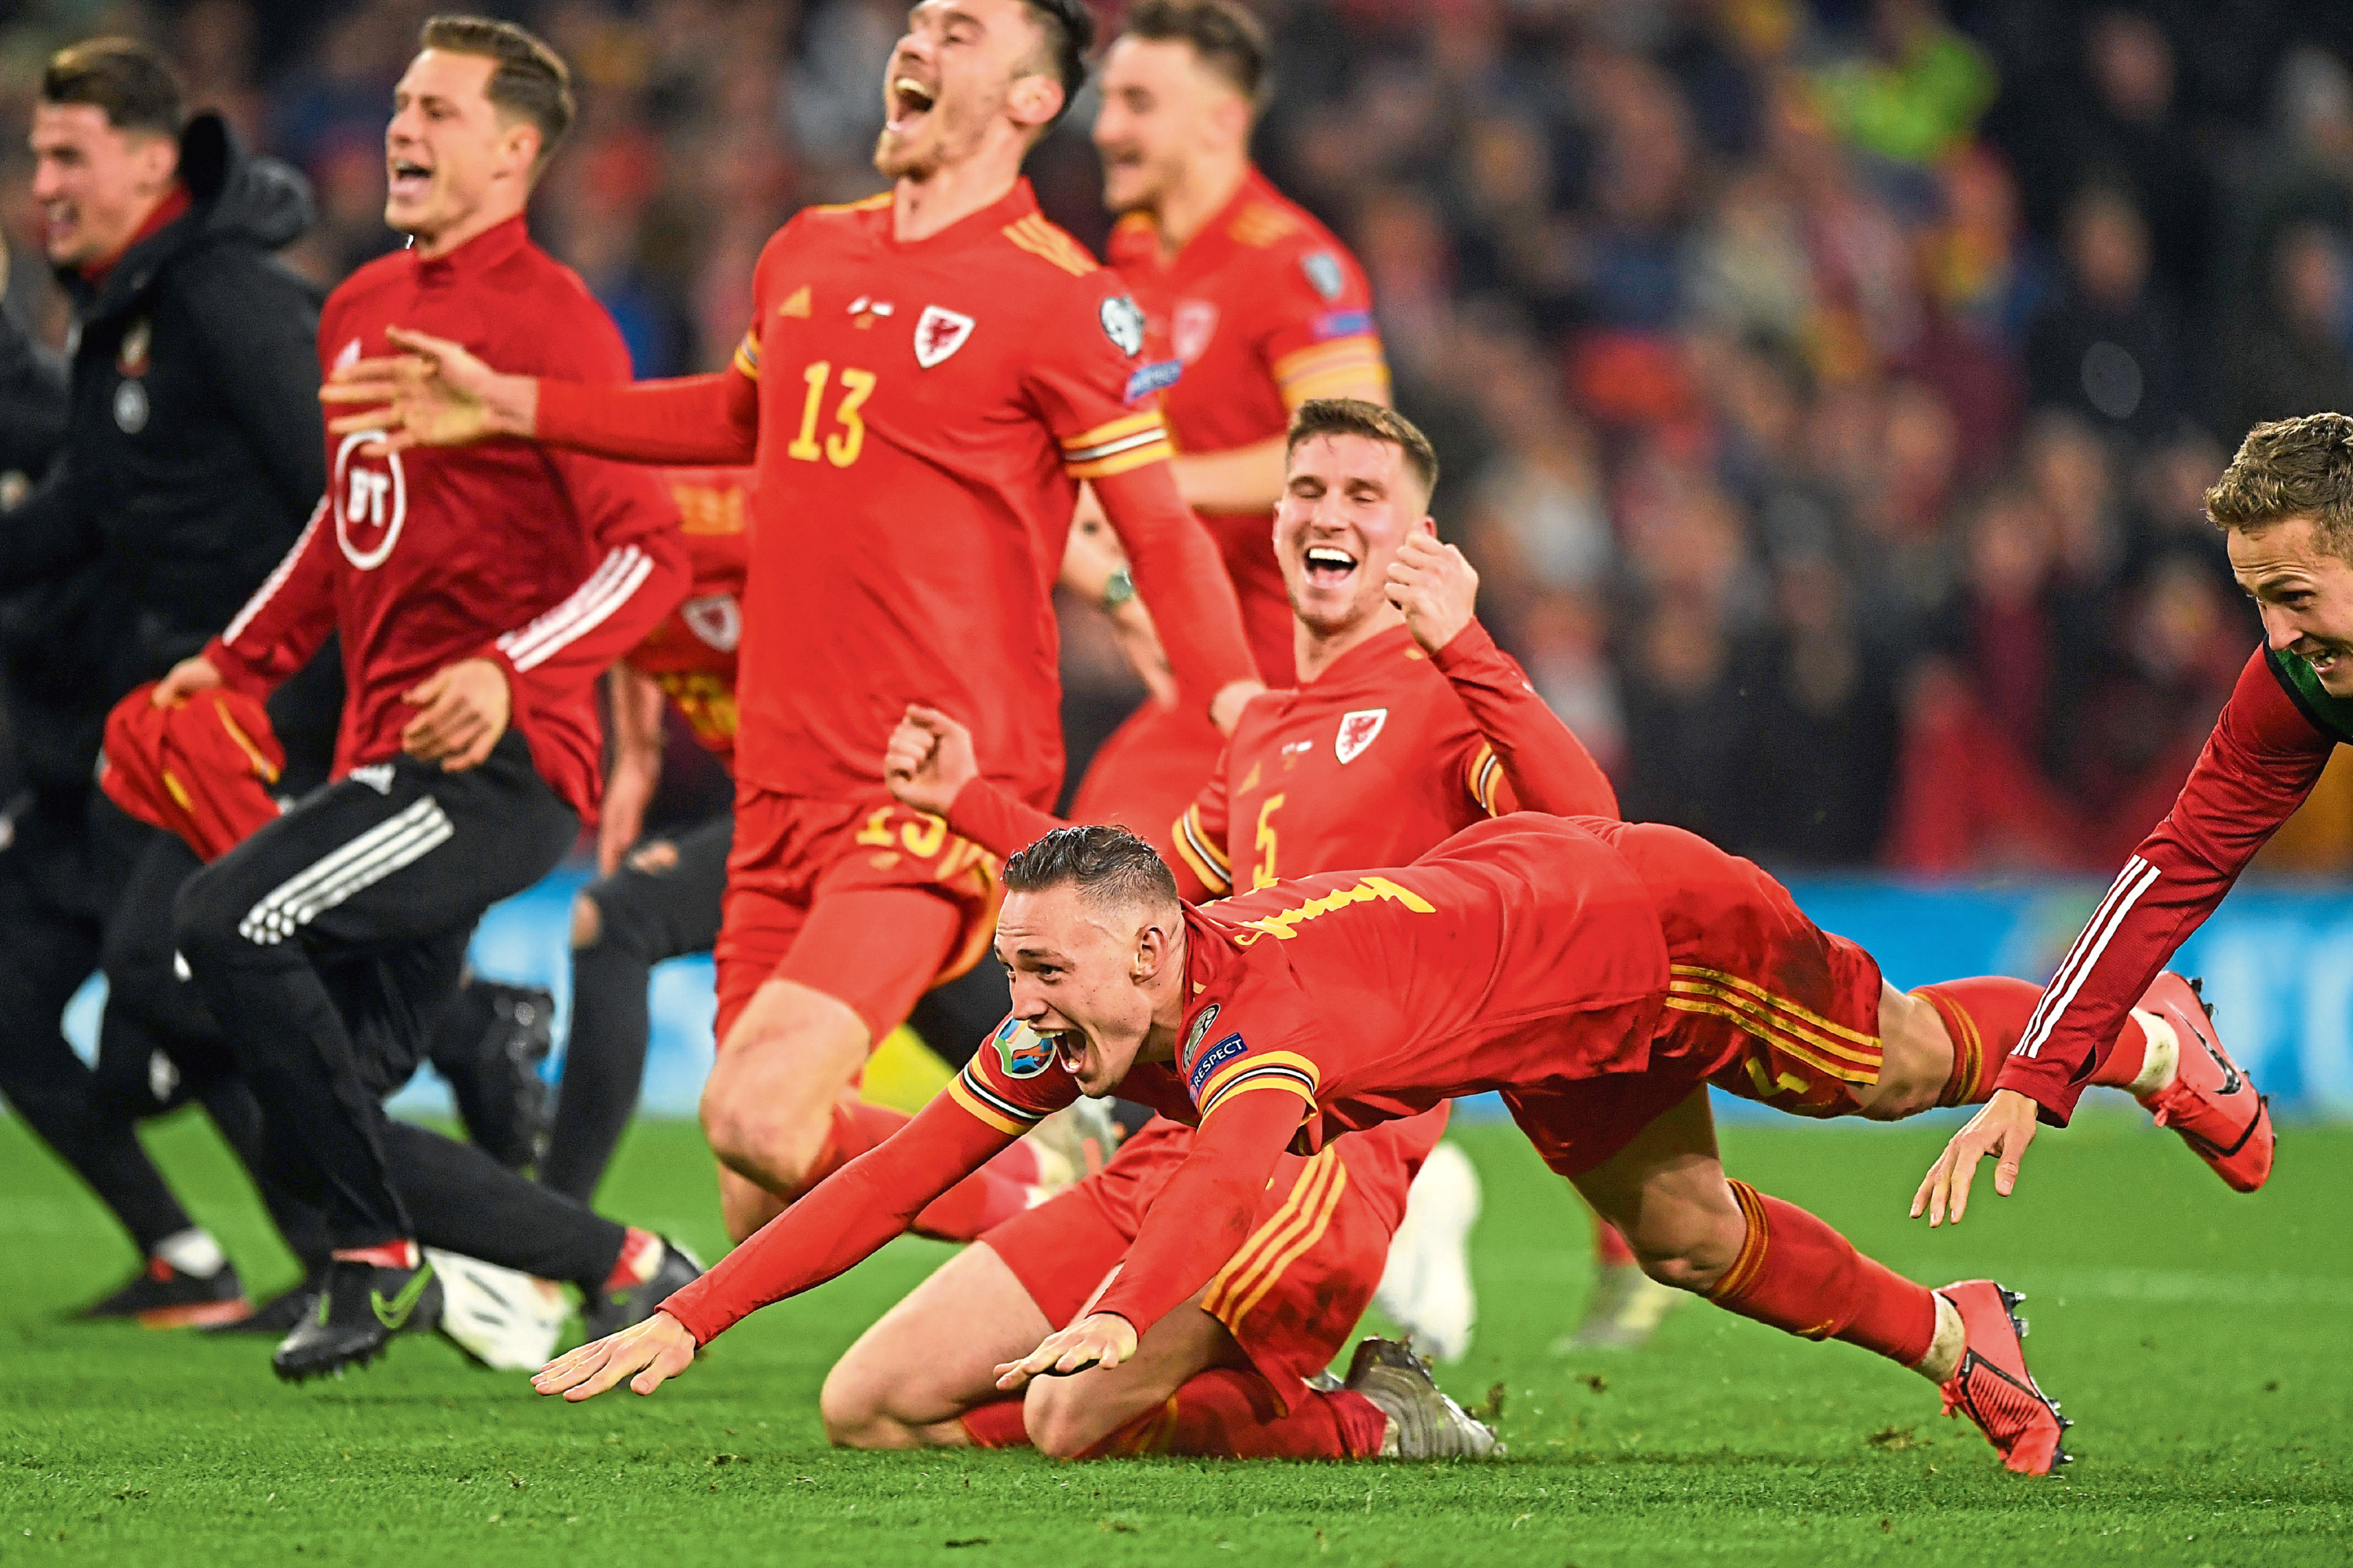 Wales celebrate qualifying for Euro 2020 after their 2-0 win over Hungary.